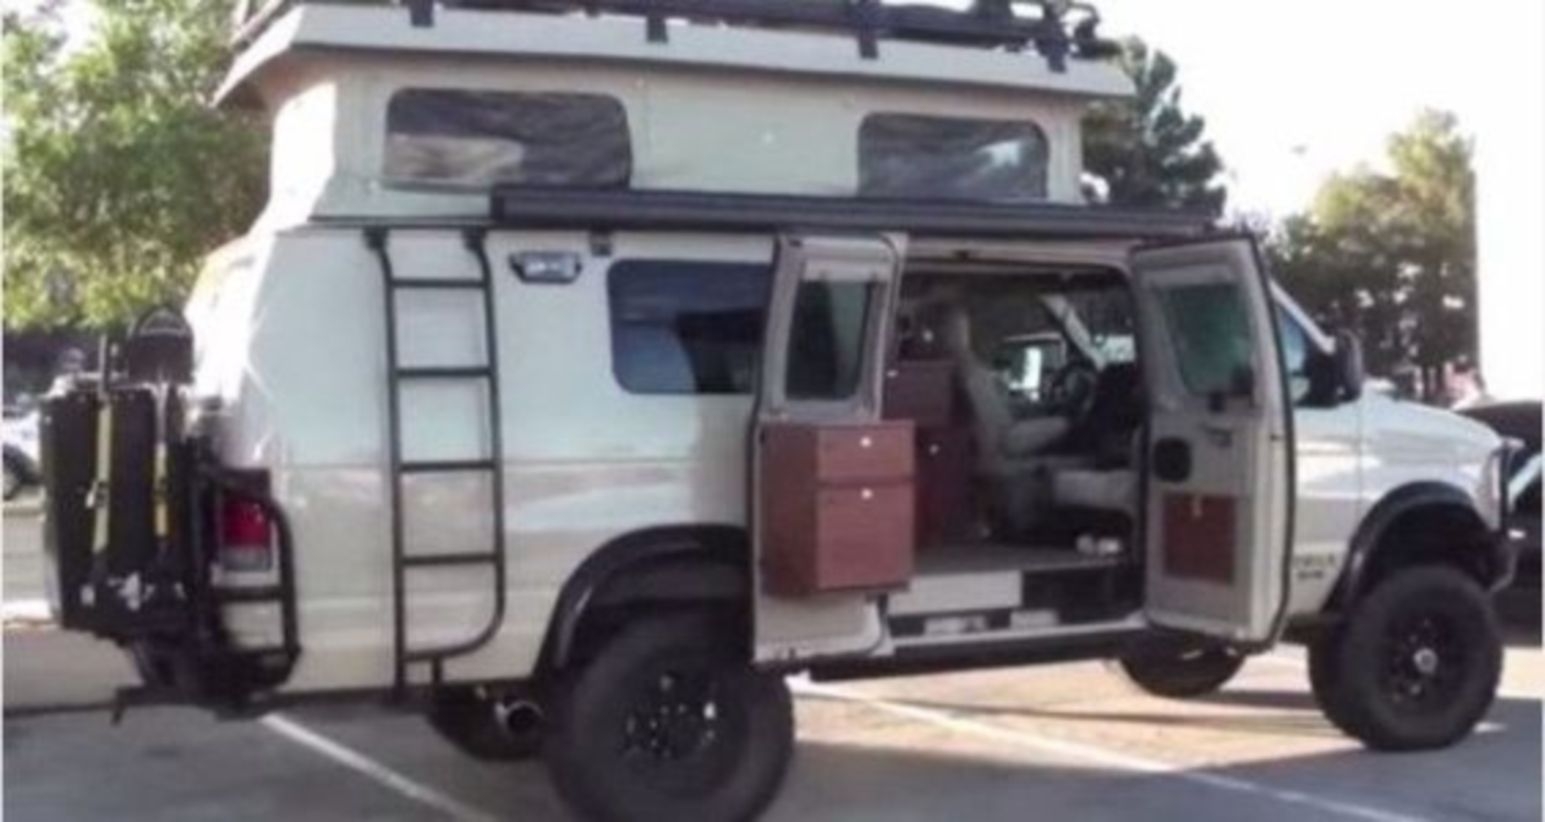 Sportsmobile 4x4 camper van looks like an ideal vehicle for every sportsman's outdoor adventures